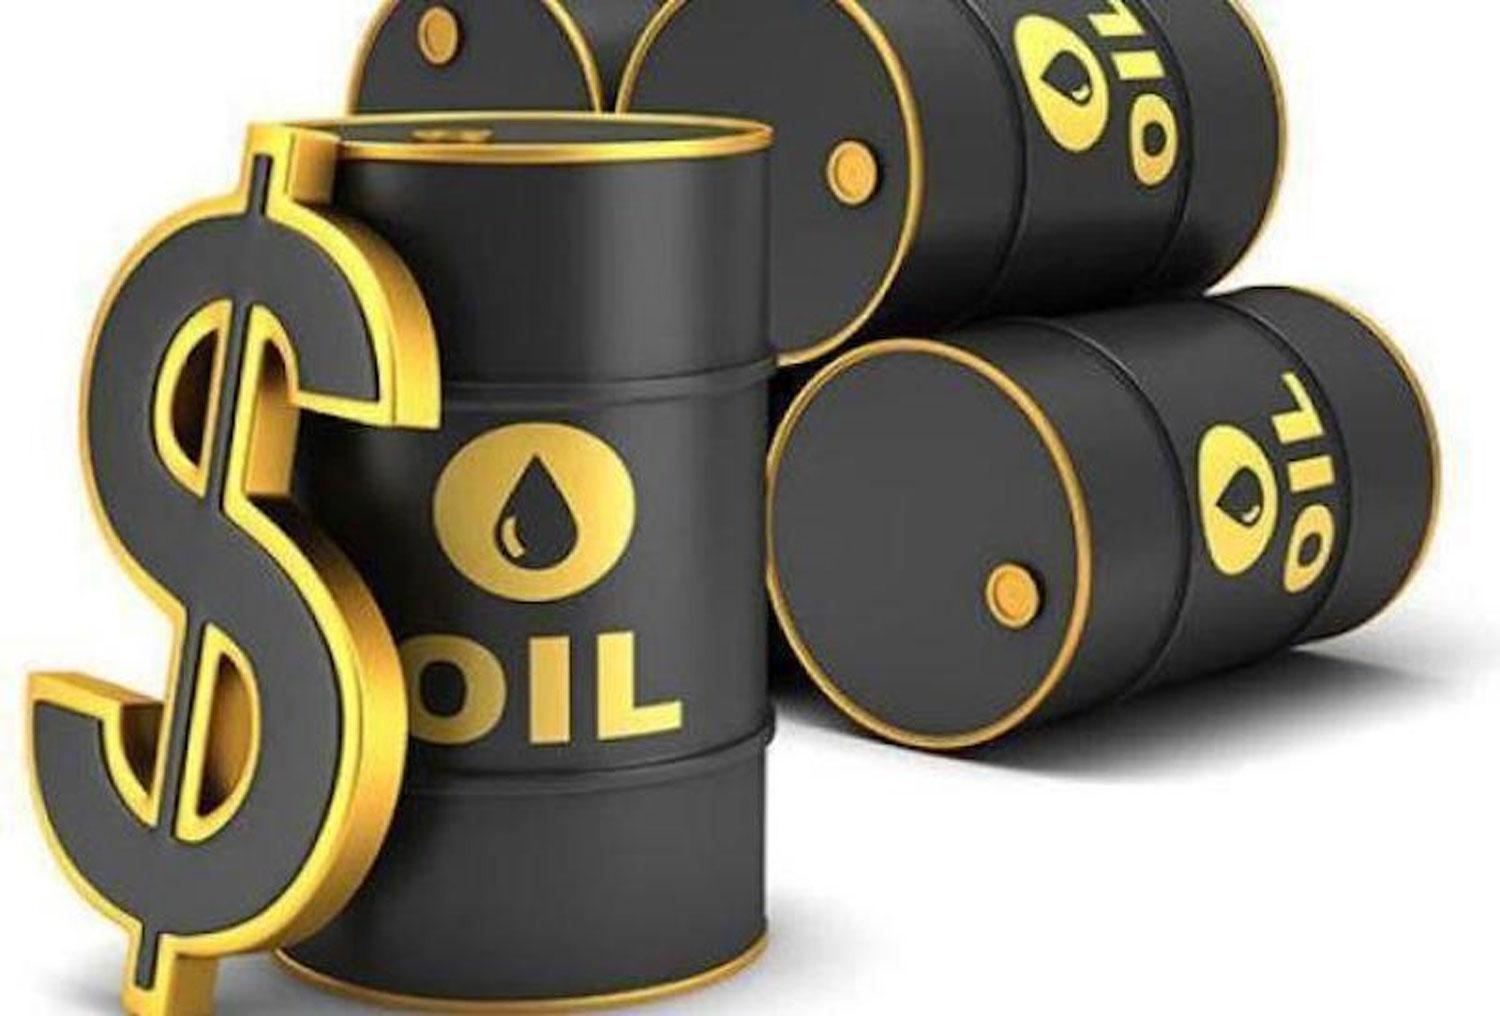 Crude oil price to hit $90 per barrel in 3 months — Experts